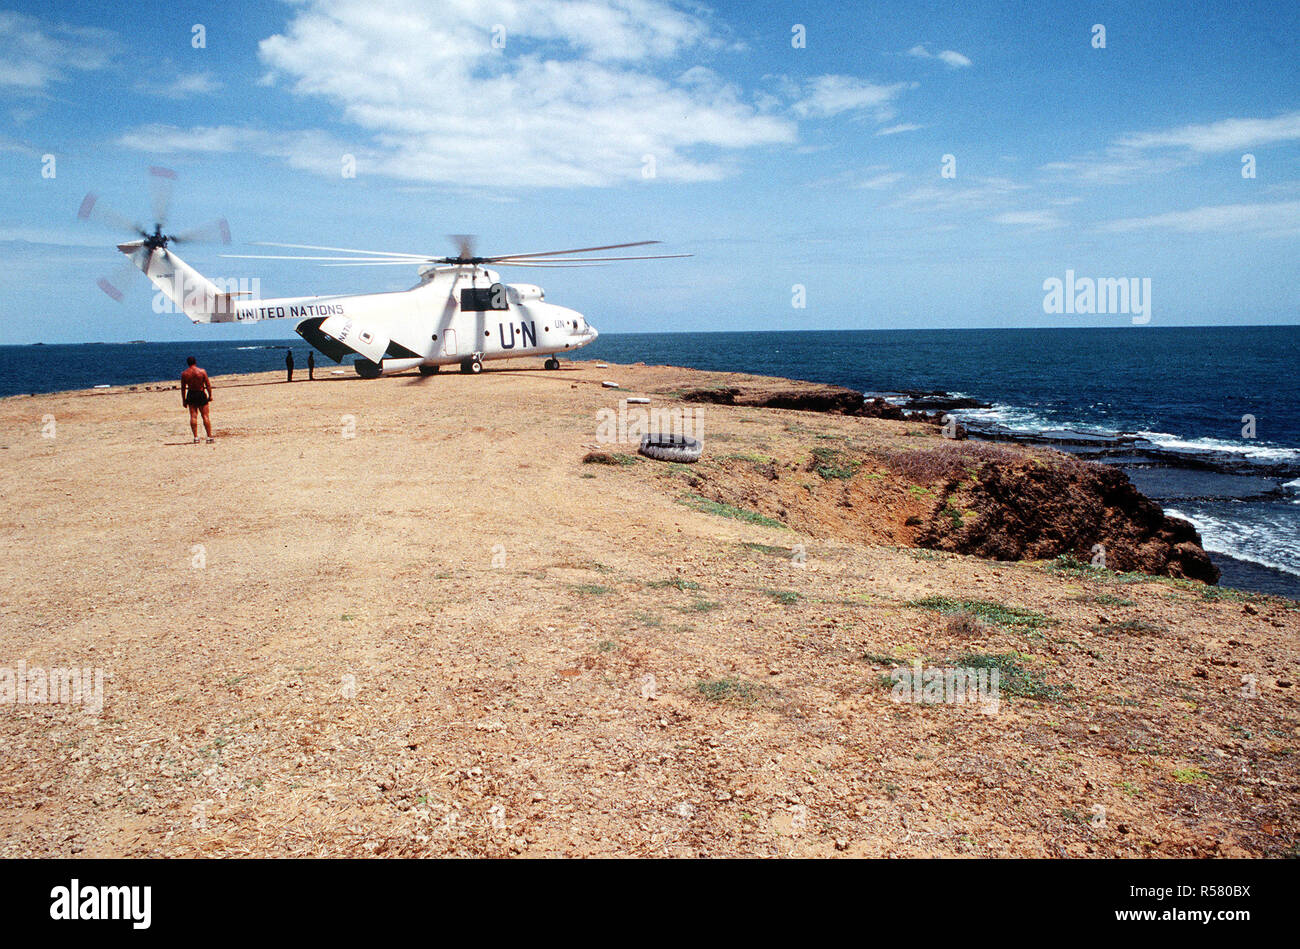 1993 - A Russian made Mi-26 Halo helicopter on the shores of Kismayo, Somalia.  The Mi-26 Halo is used to shuttle supplies and personnel to areas outside Mogadishu during Operation CONTINUE HOPE. Stock Photo